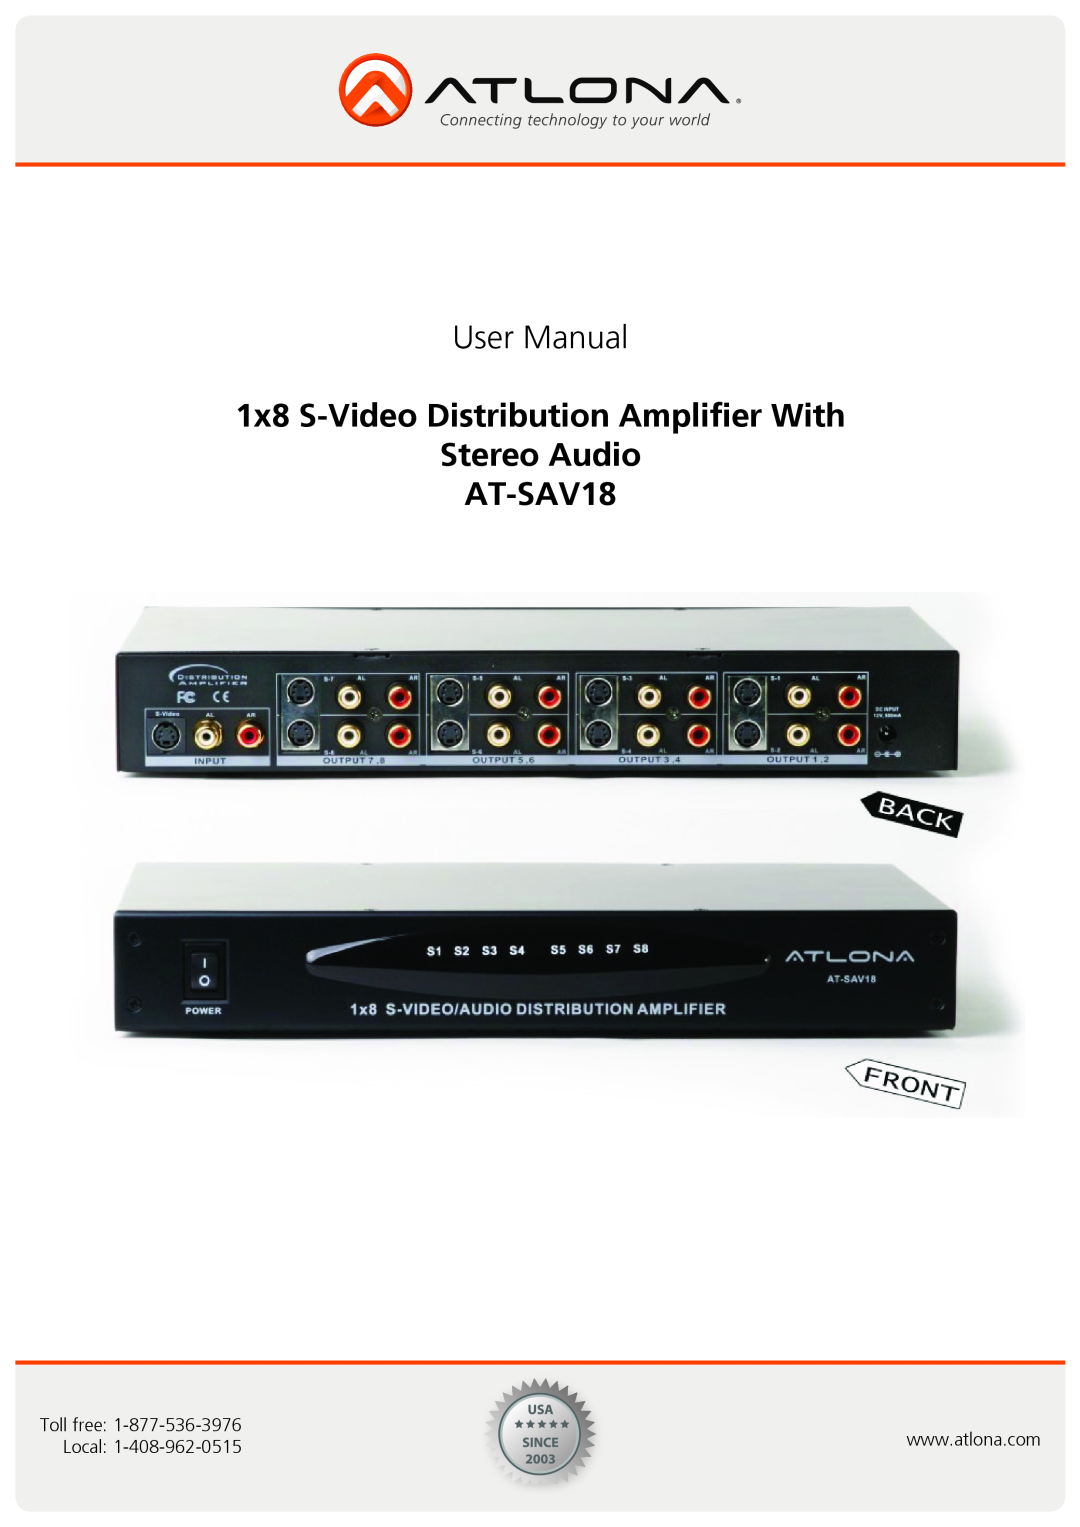 Atlona user manual 1x8 S-VideoDistribution Amplifier With, Stereo Audio AT-SAV18, Toll free, Local 